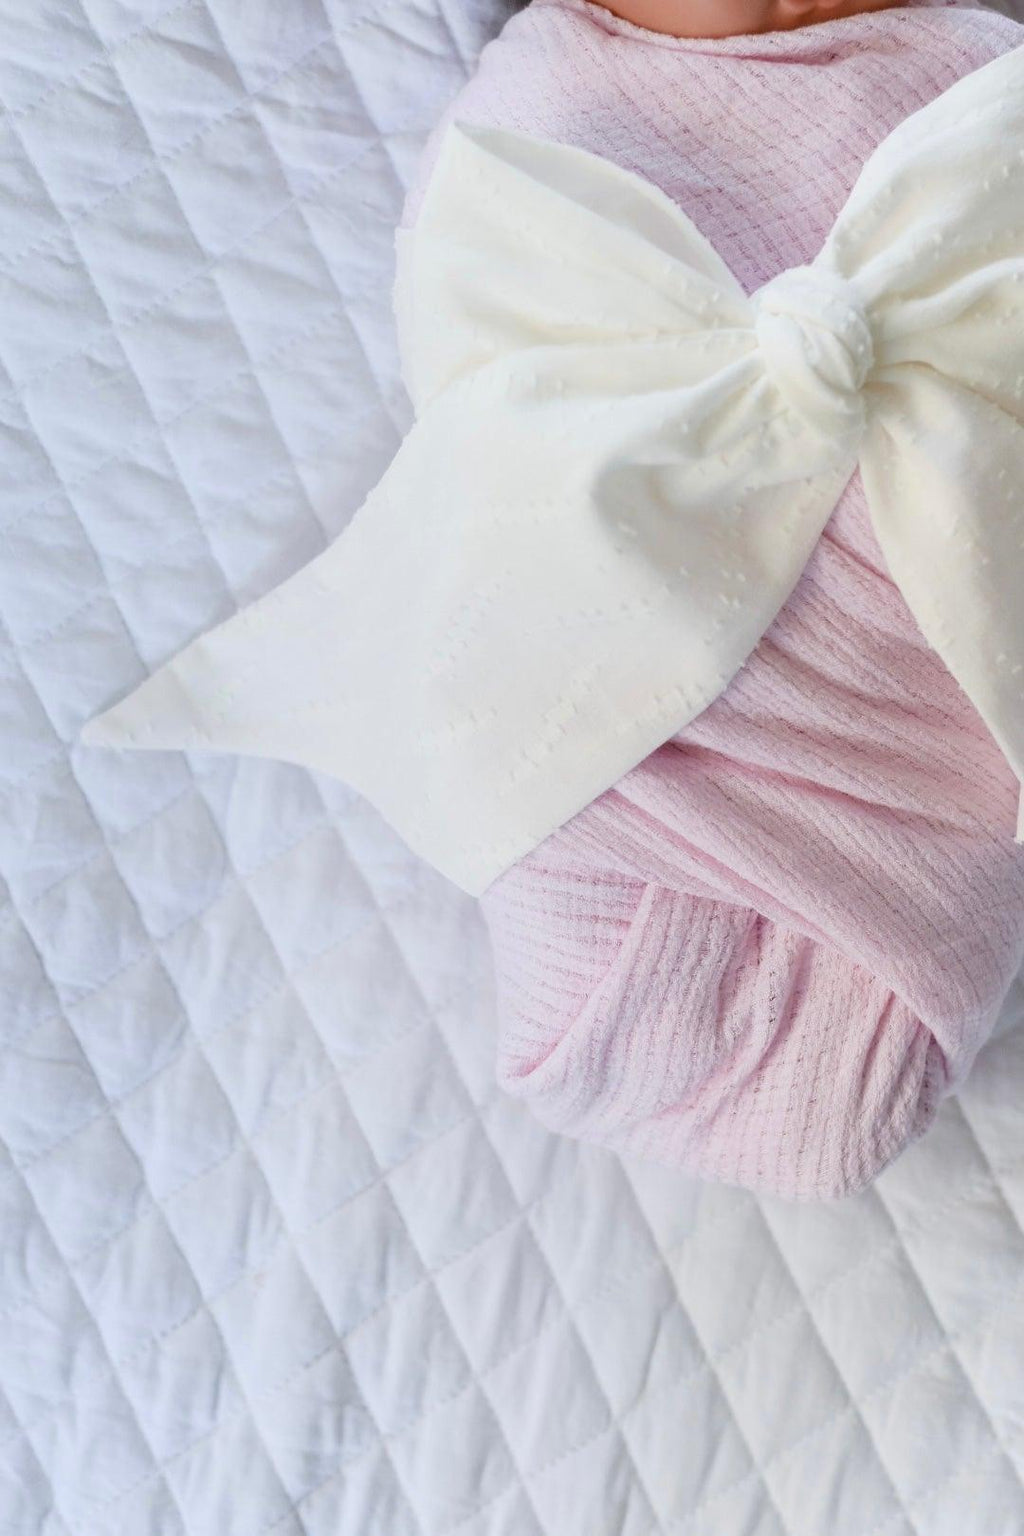 Swaddle Bow- Lily White | Nashville Bow Co. - Classic Hair Bows, Bow Ties, Basket Bows, Pacifier Clips, Wreath Sashes, Swaddle Bows. Classic Southern Charm.